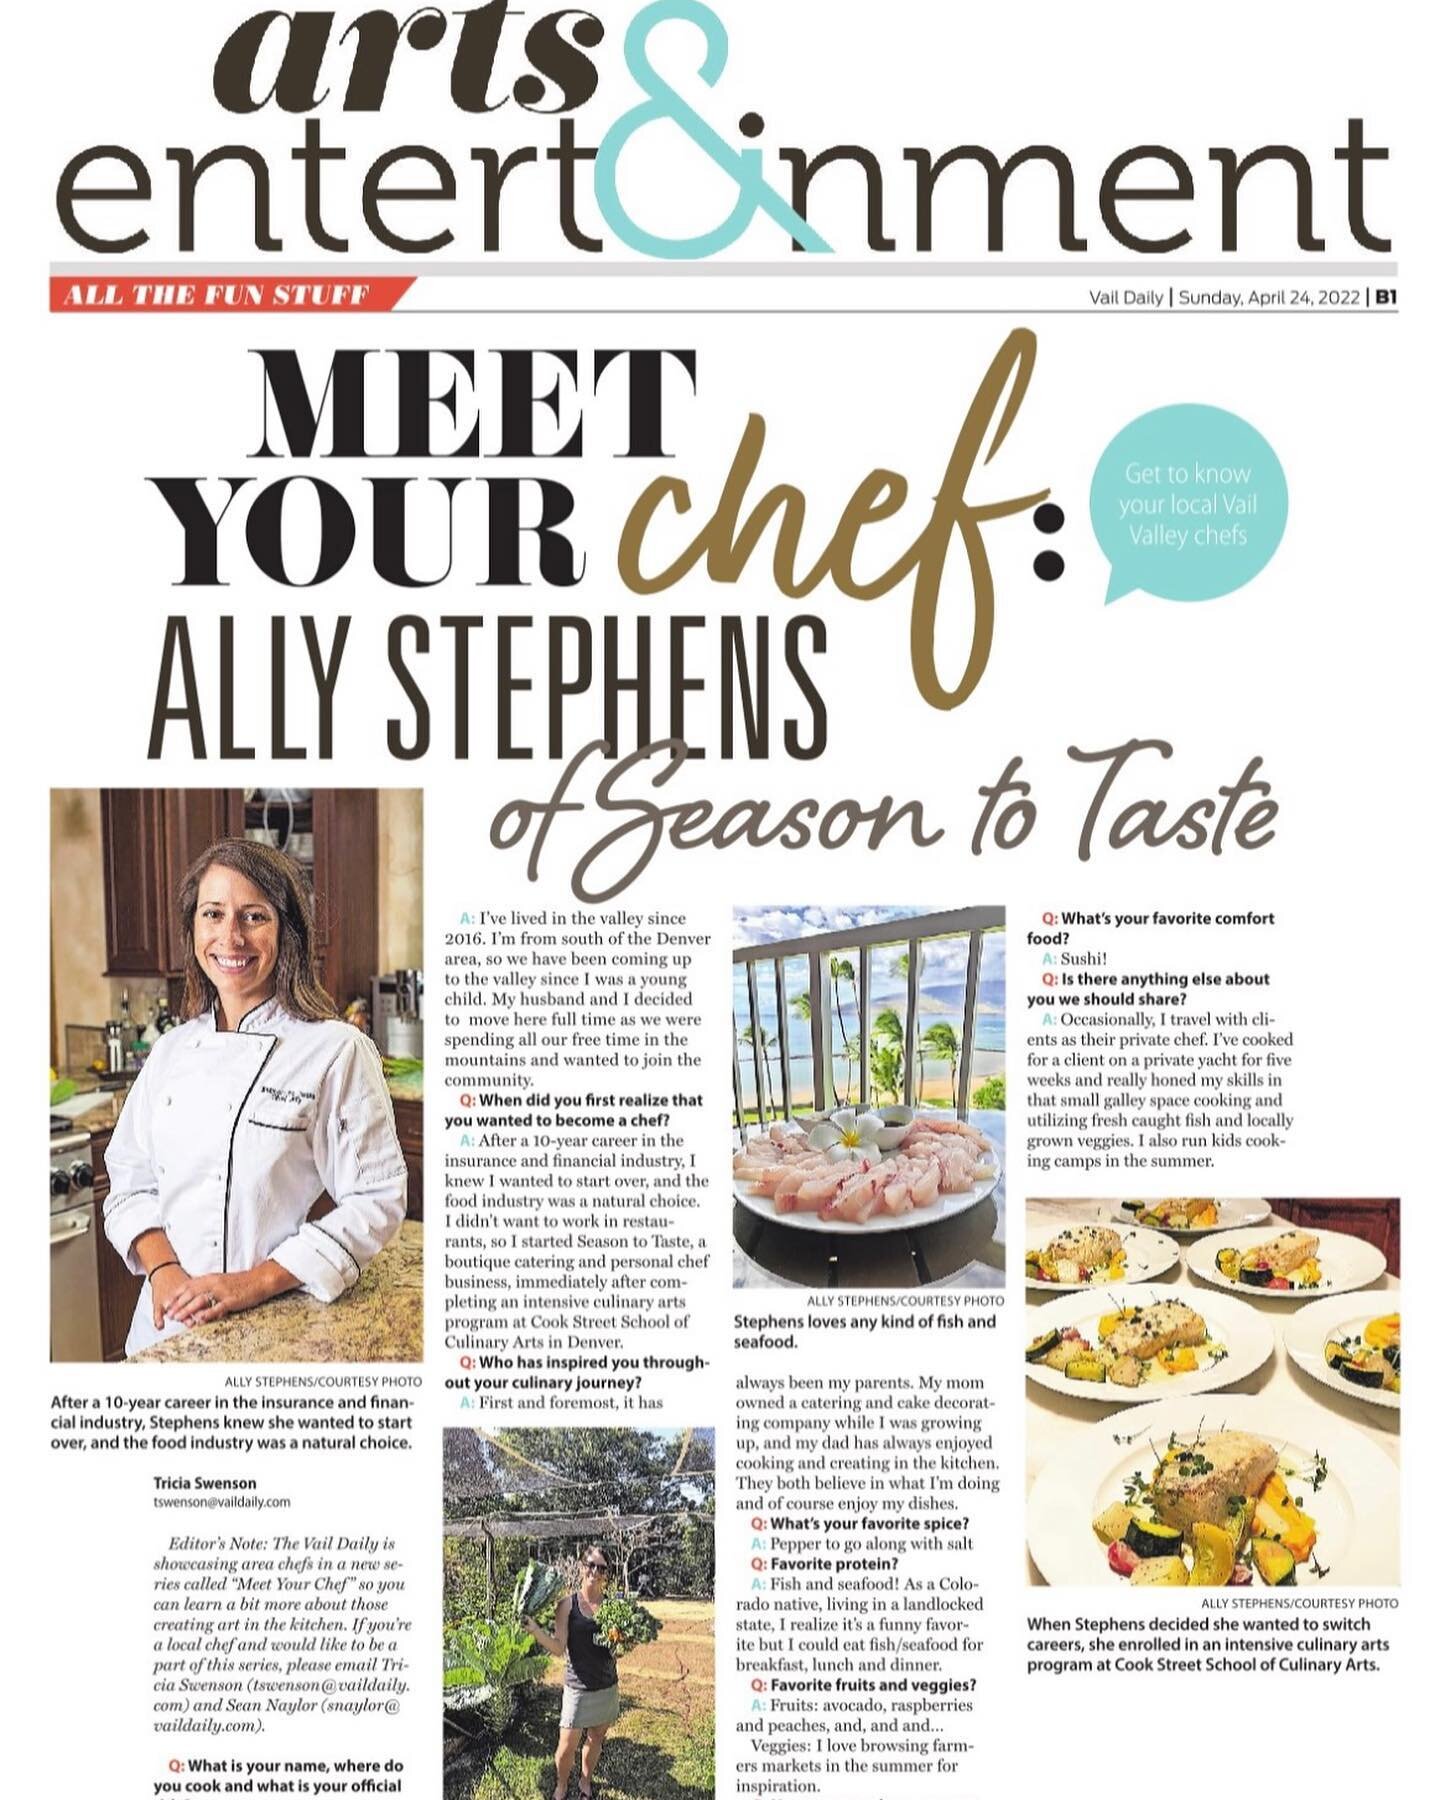 Thank you @vaildaily for the feature in the Meet Your Chef series!